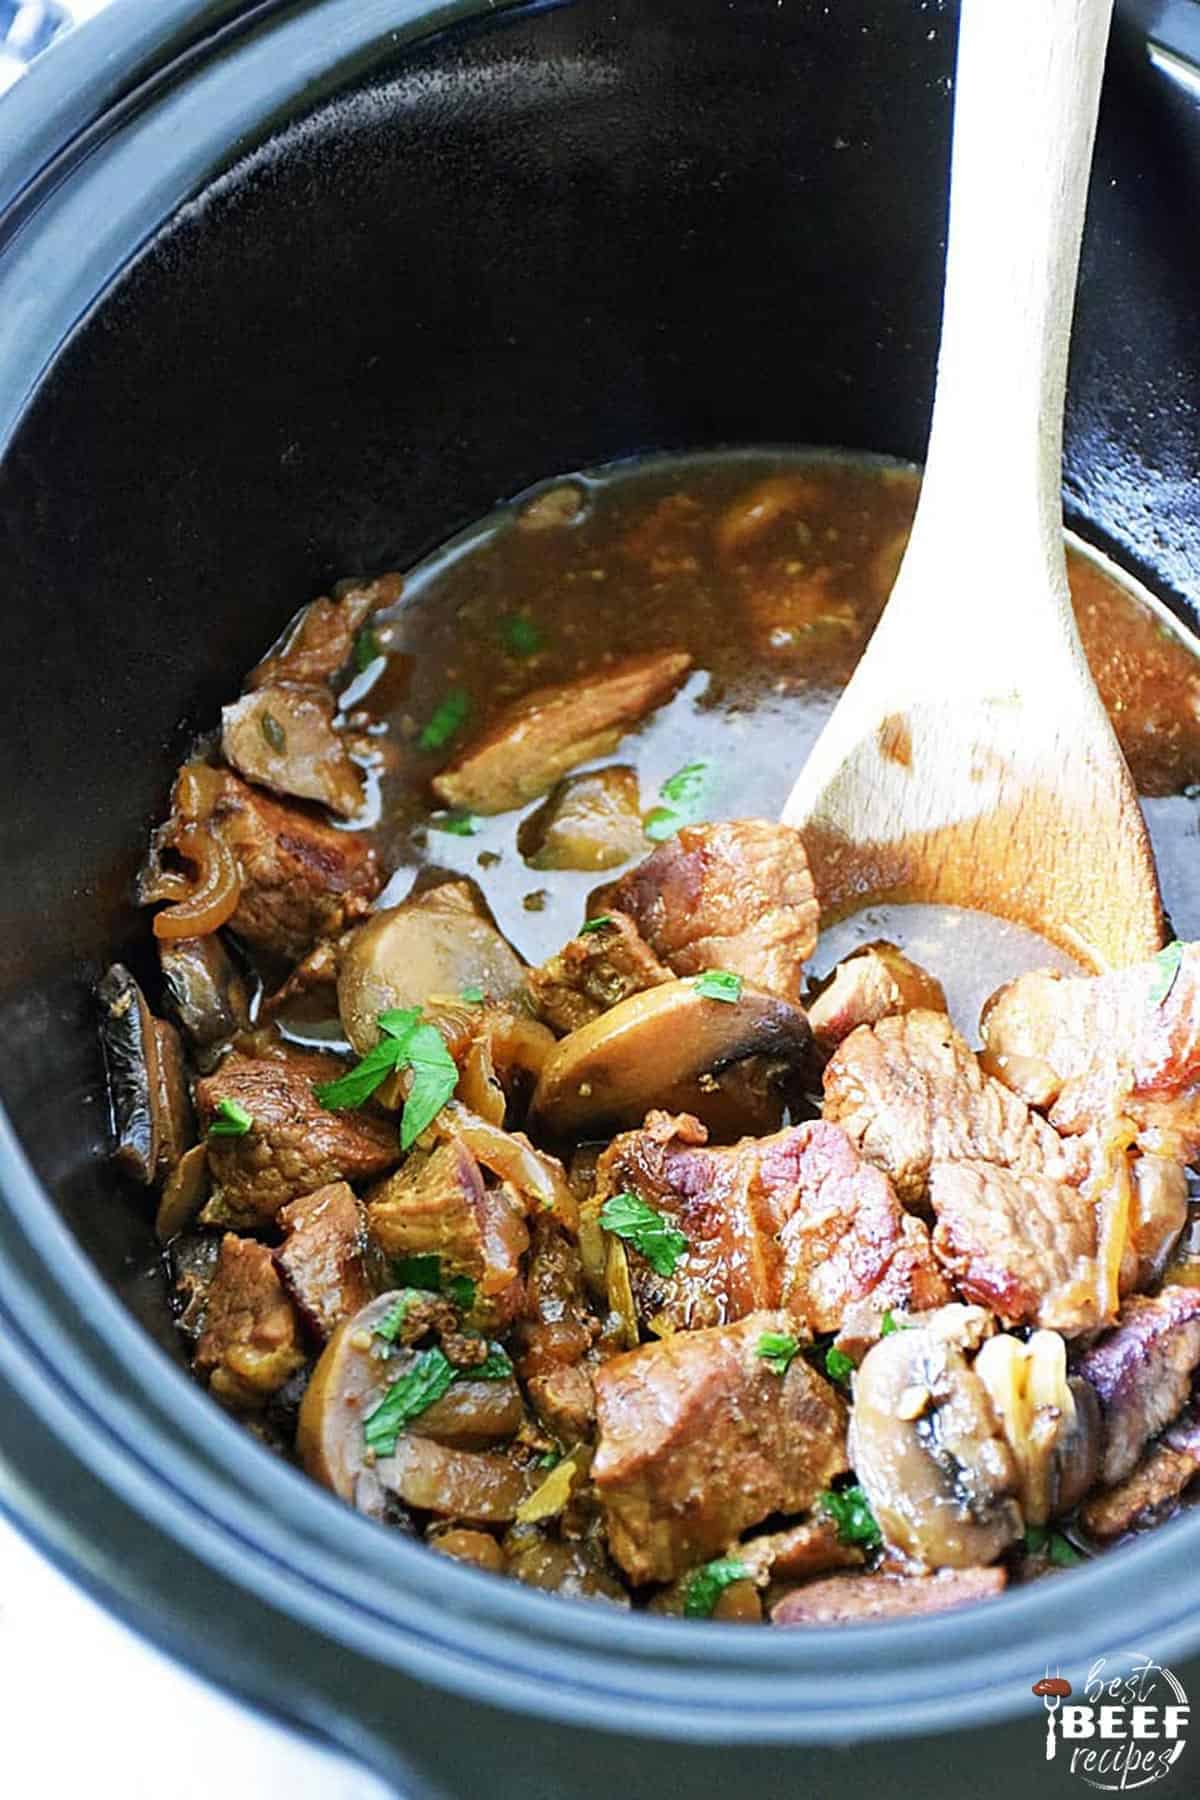 Slow cooker beef tips and gravy in the crockpot after cooking with a wooden spoon